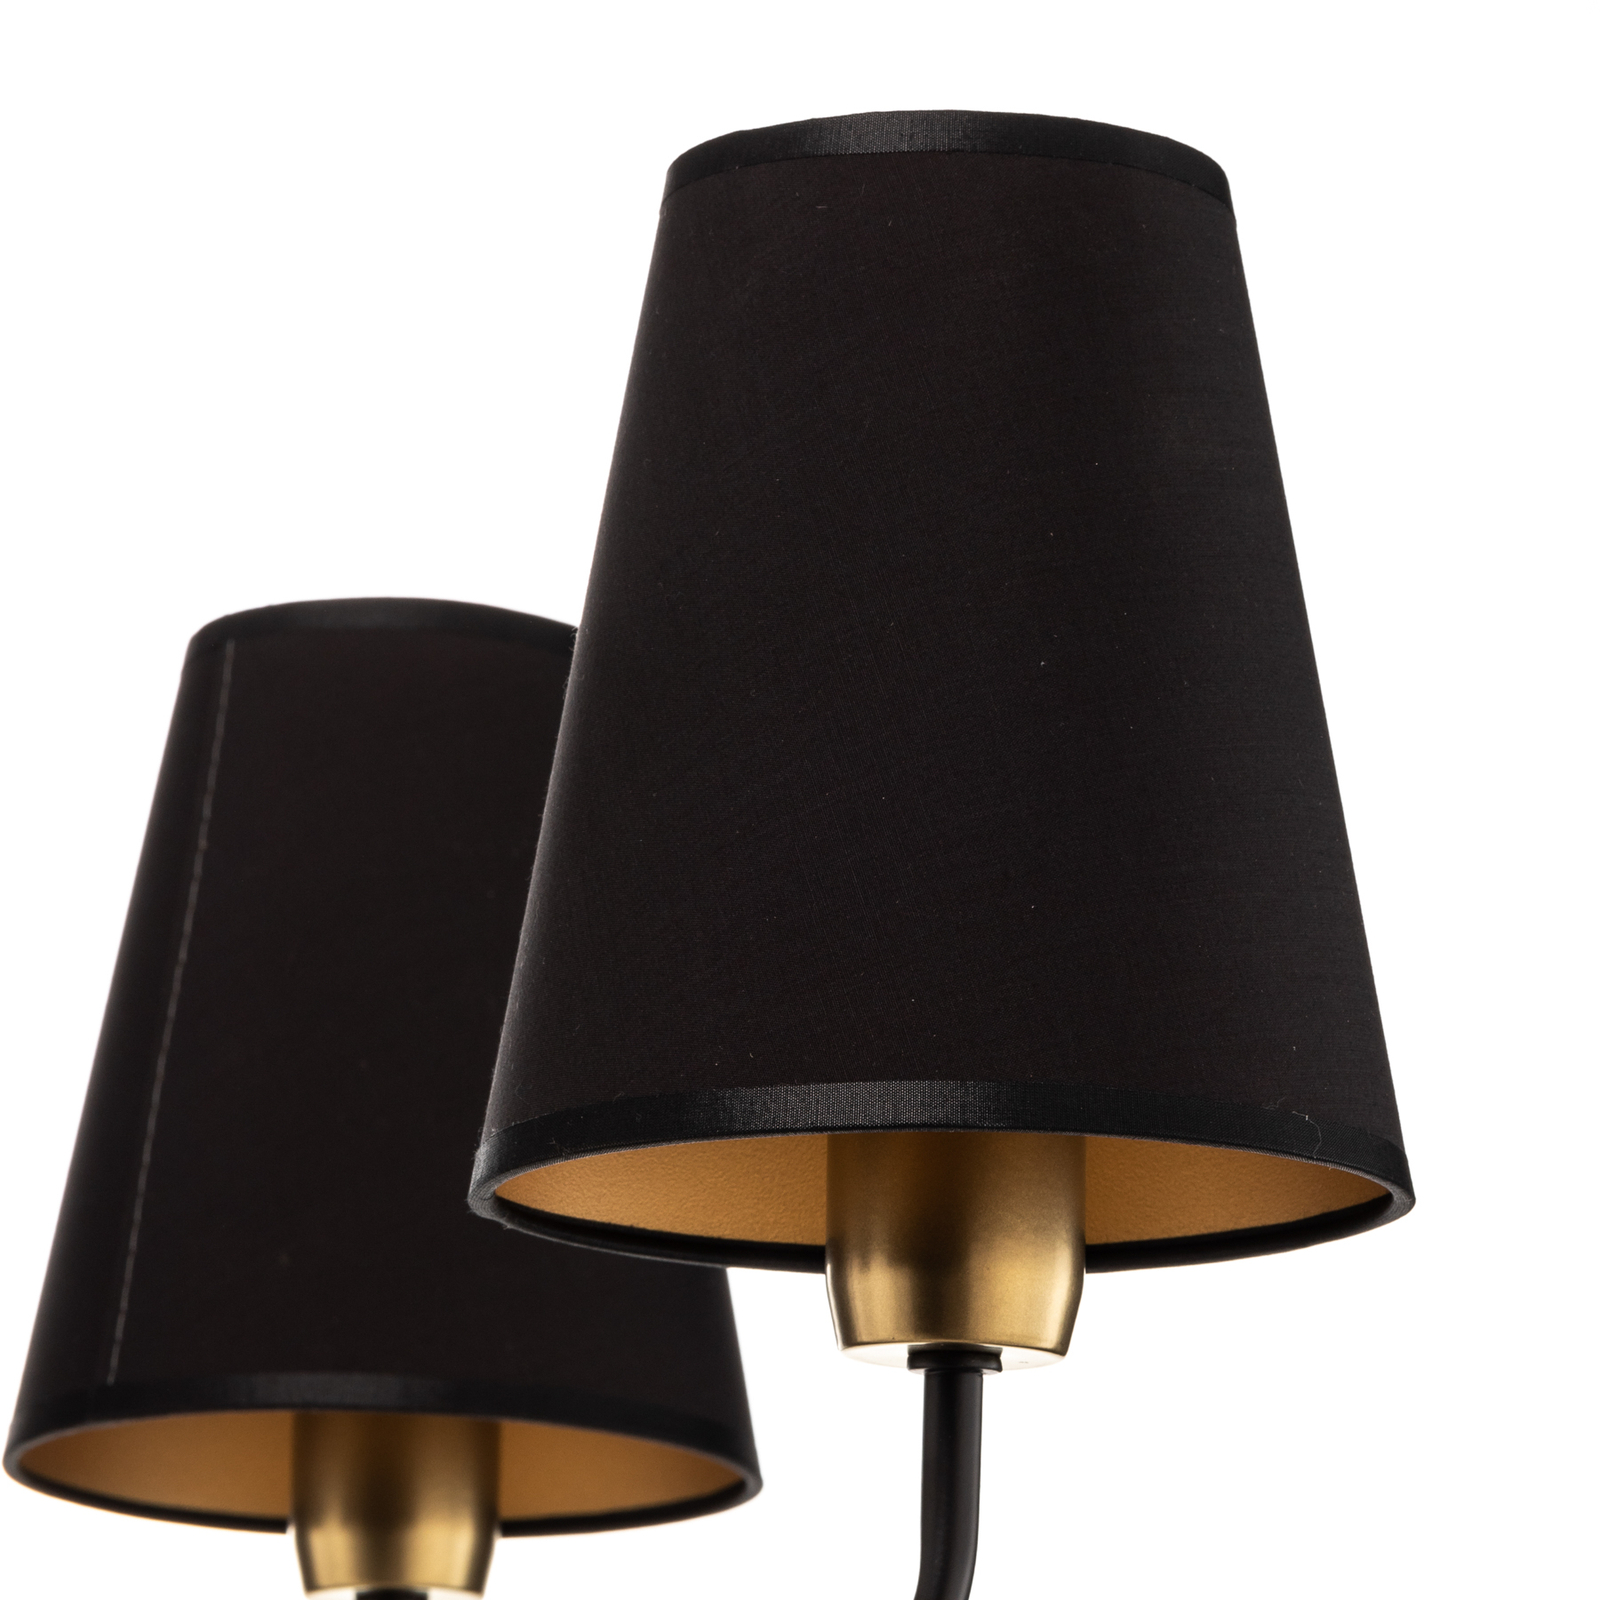 Victoria chandelier, fabric lampshades, black/gold